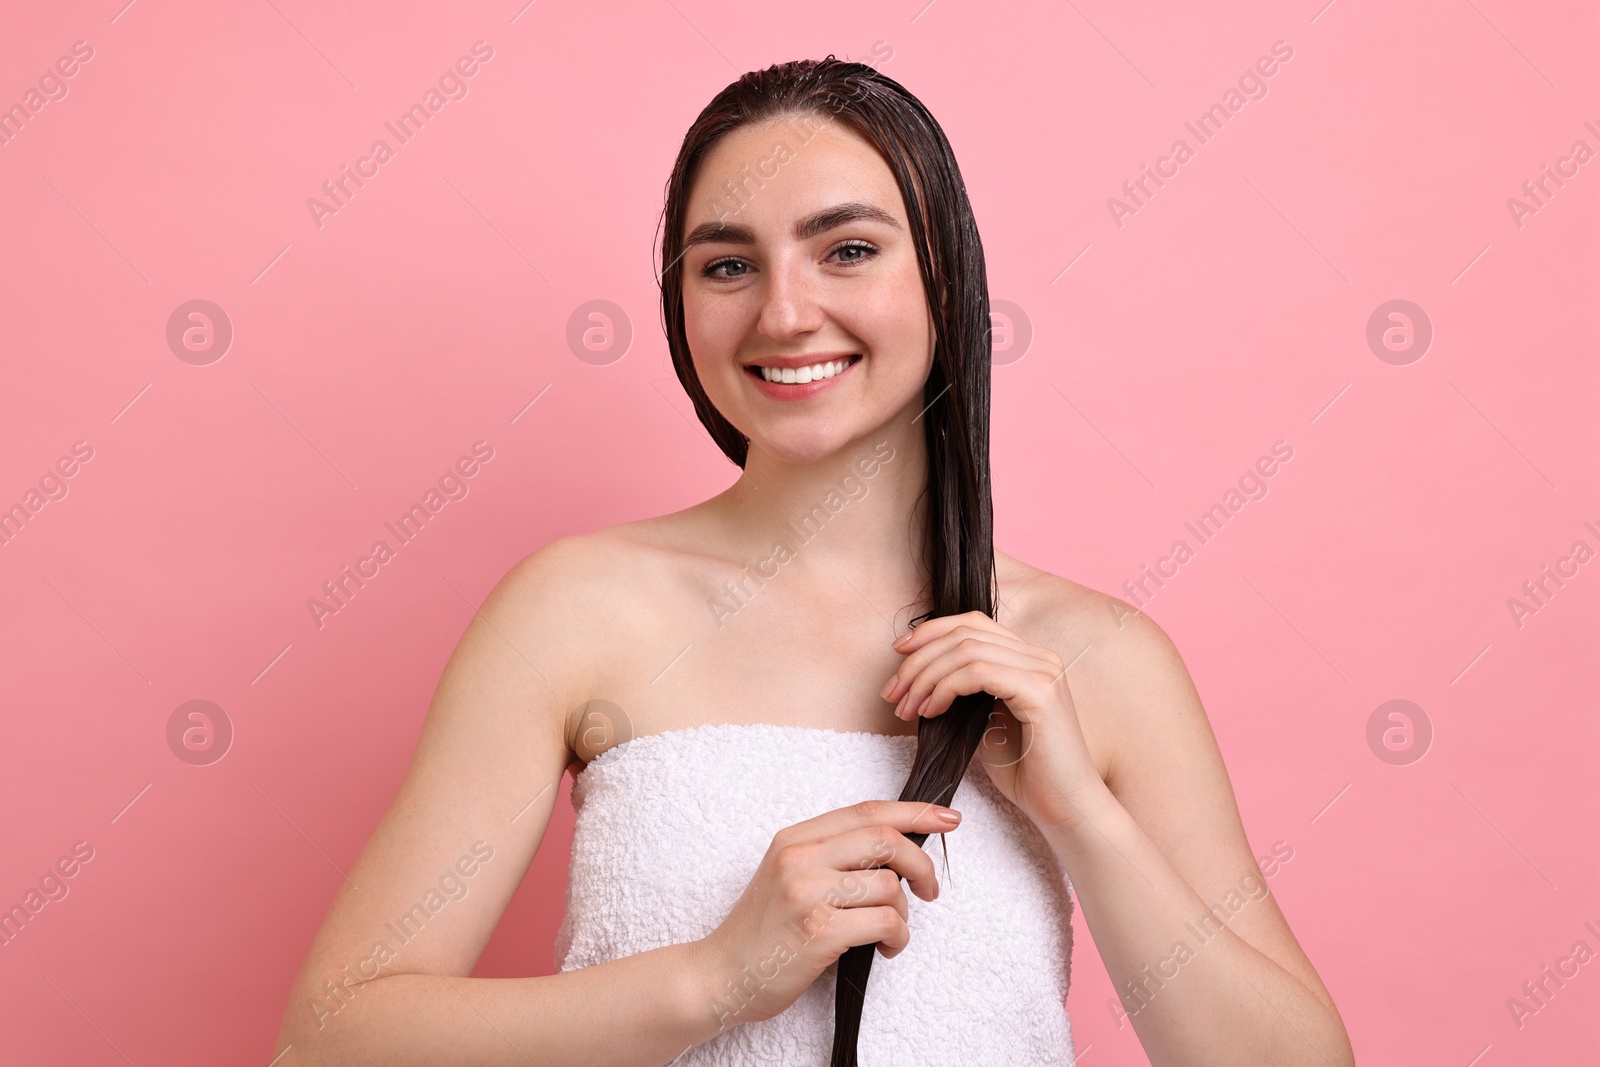 Photo of Smiling woman applying hair mask on pink background